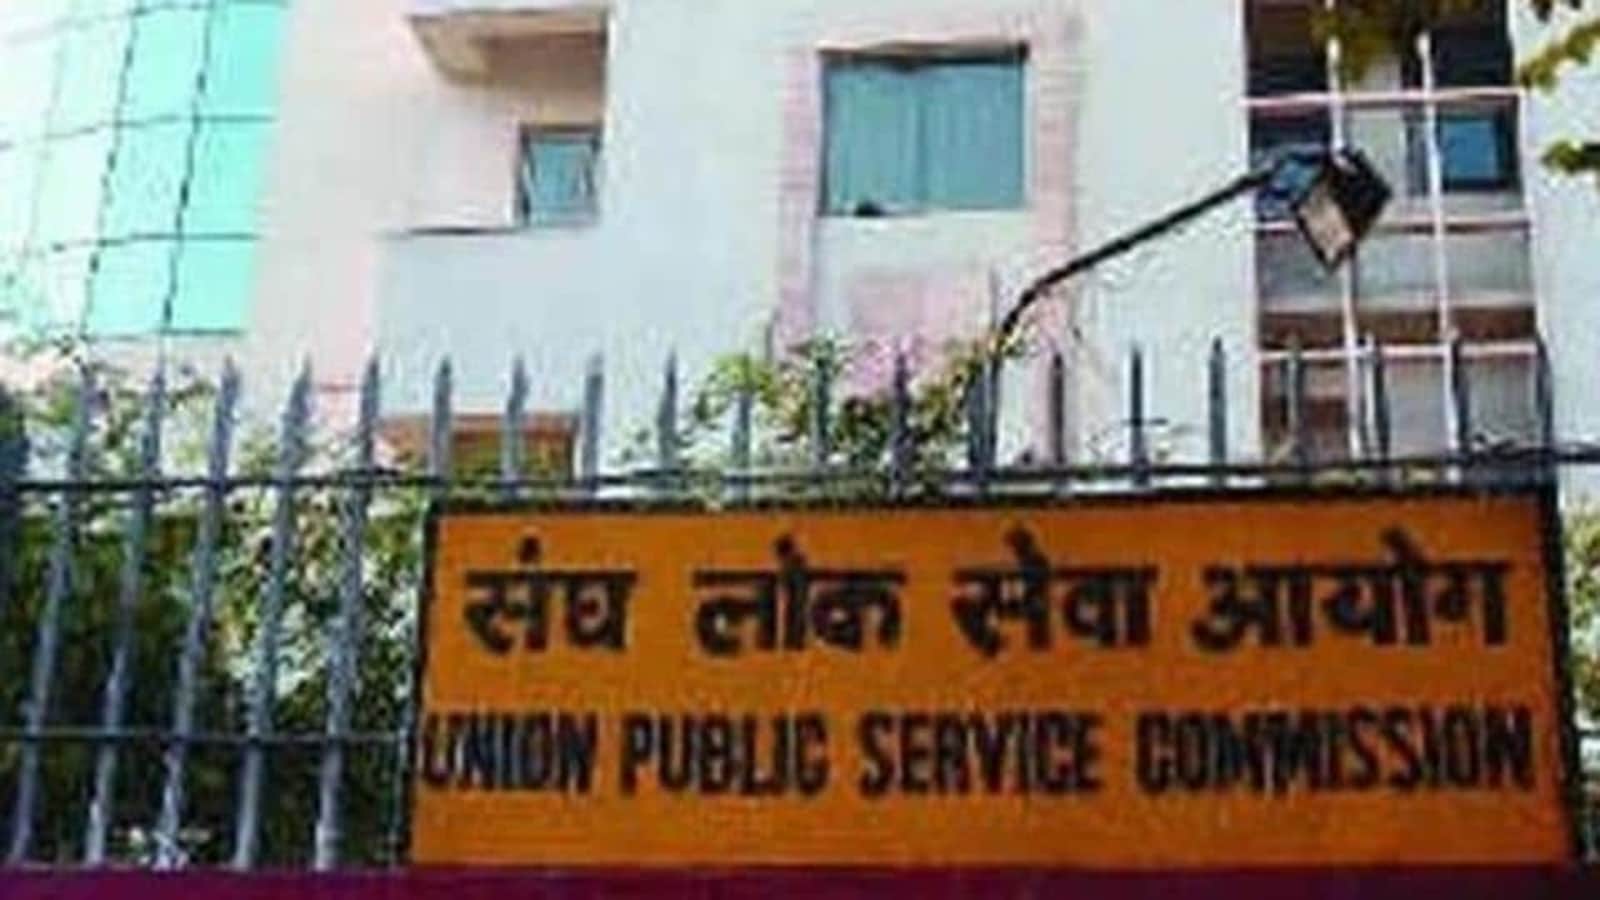 UPSC Engineering Service Exam 2022 notification released at upsc.gov.in